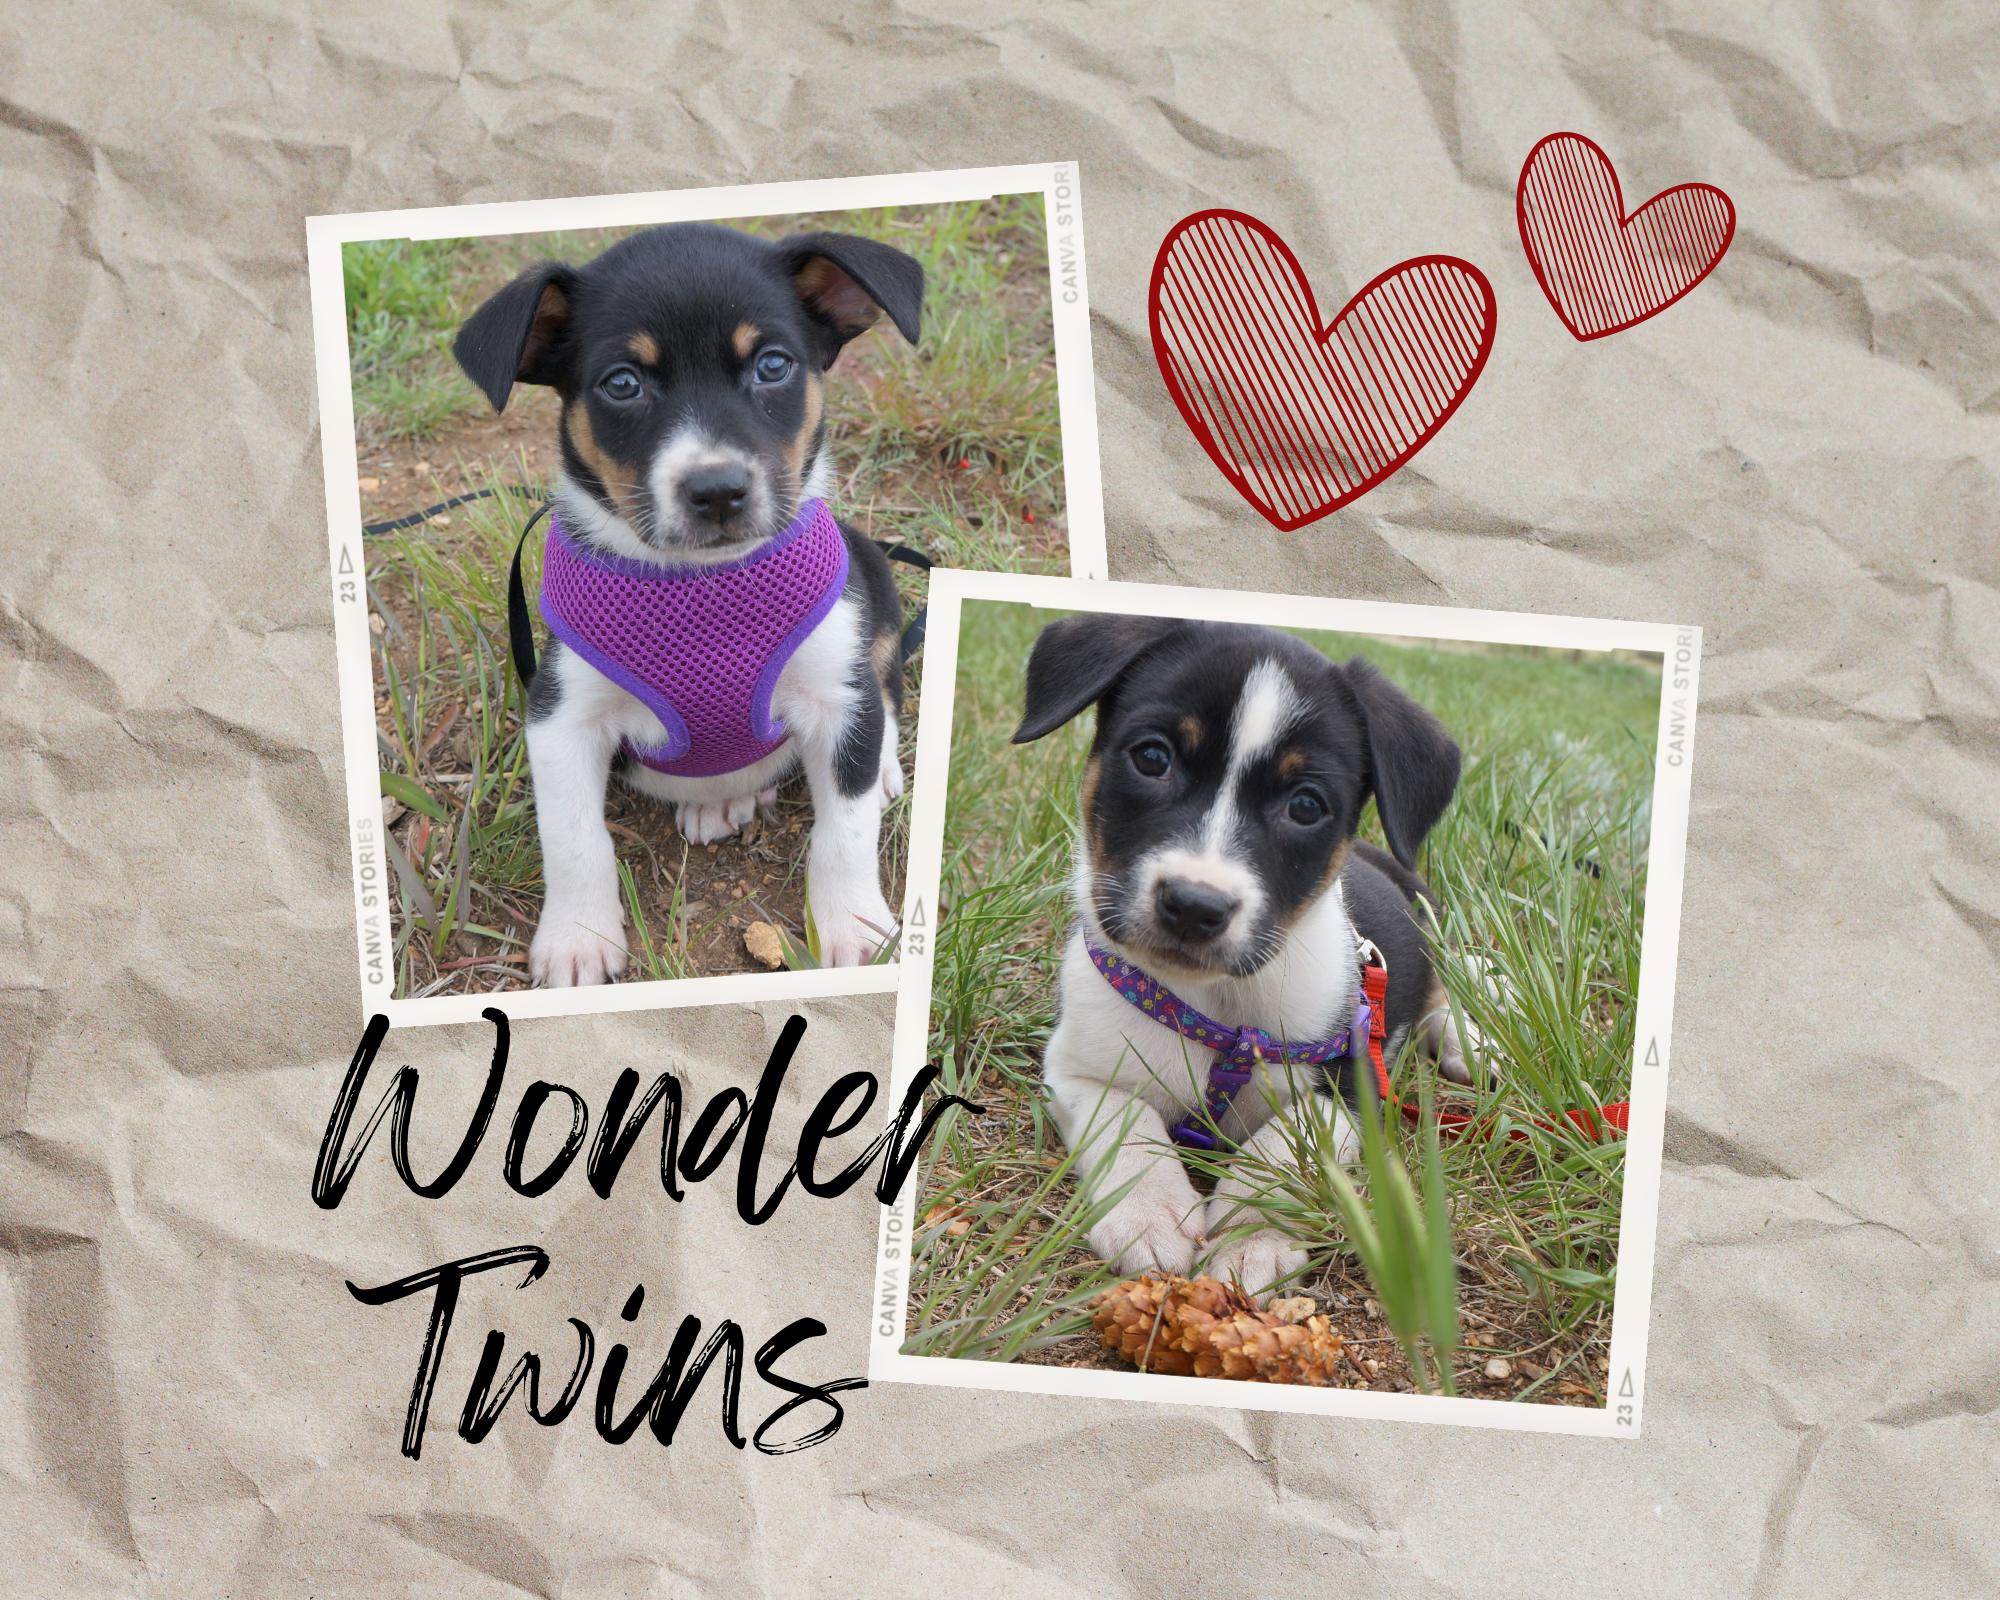 national foster a pet month example, the foster twins - photos of 2 tri-color puppies wearing purple harnesses